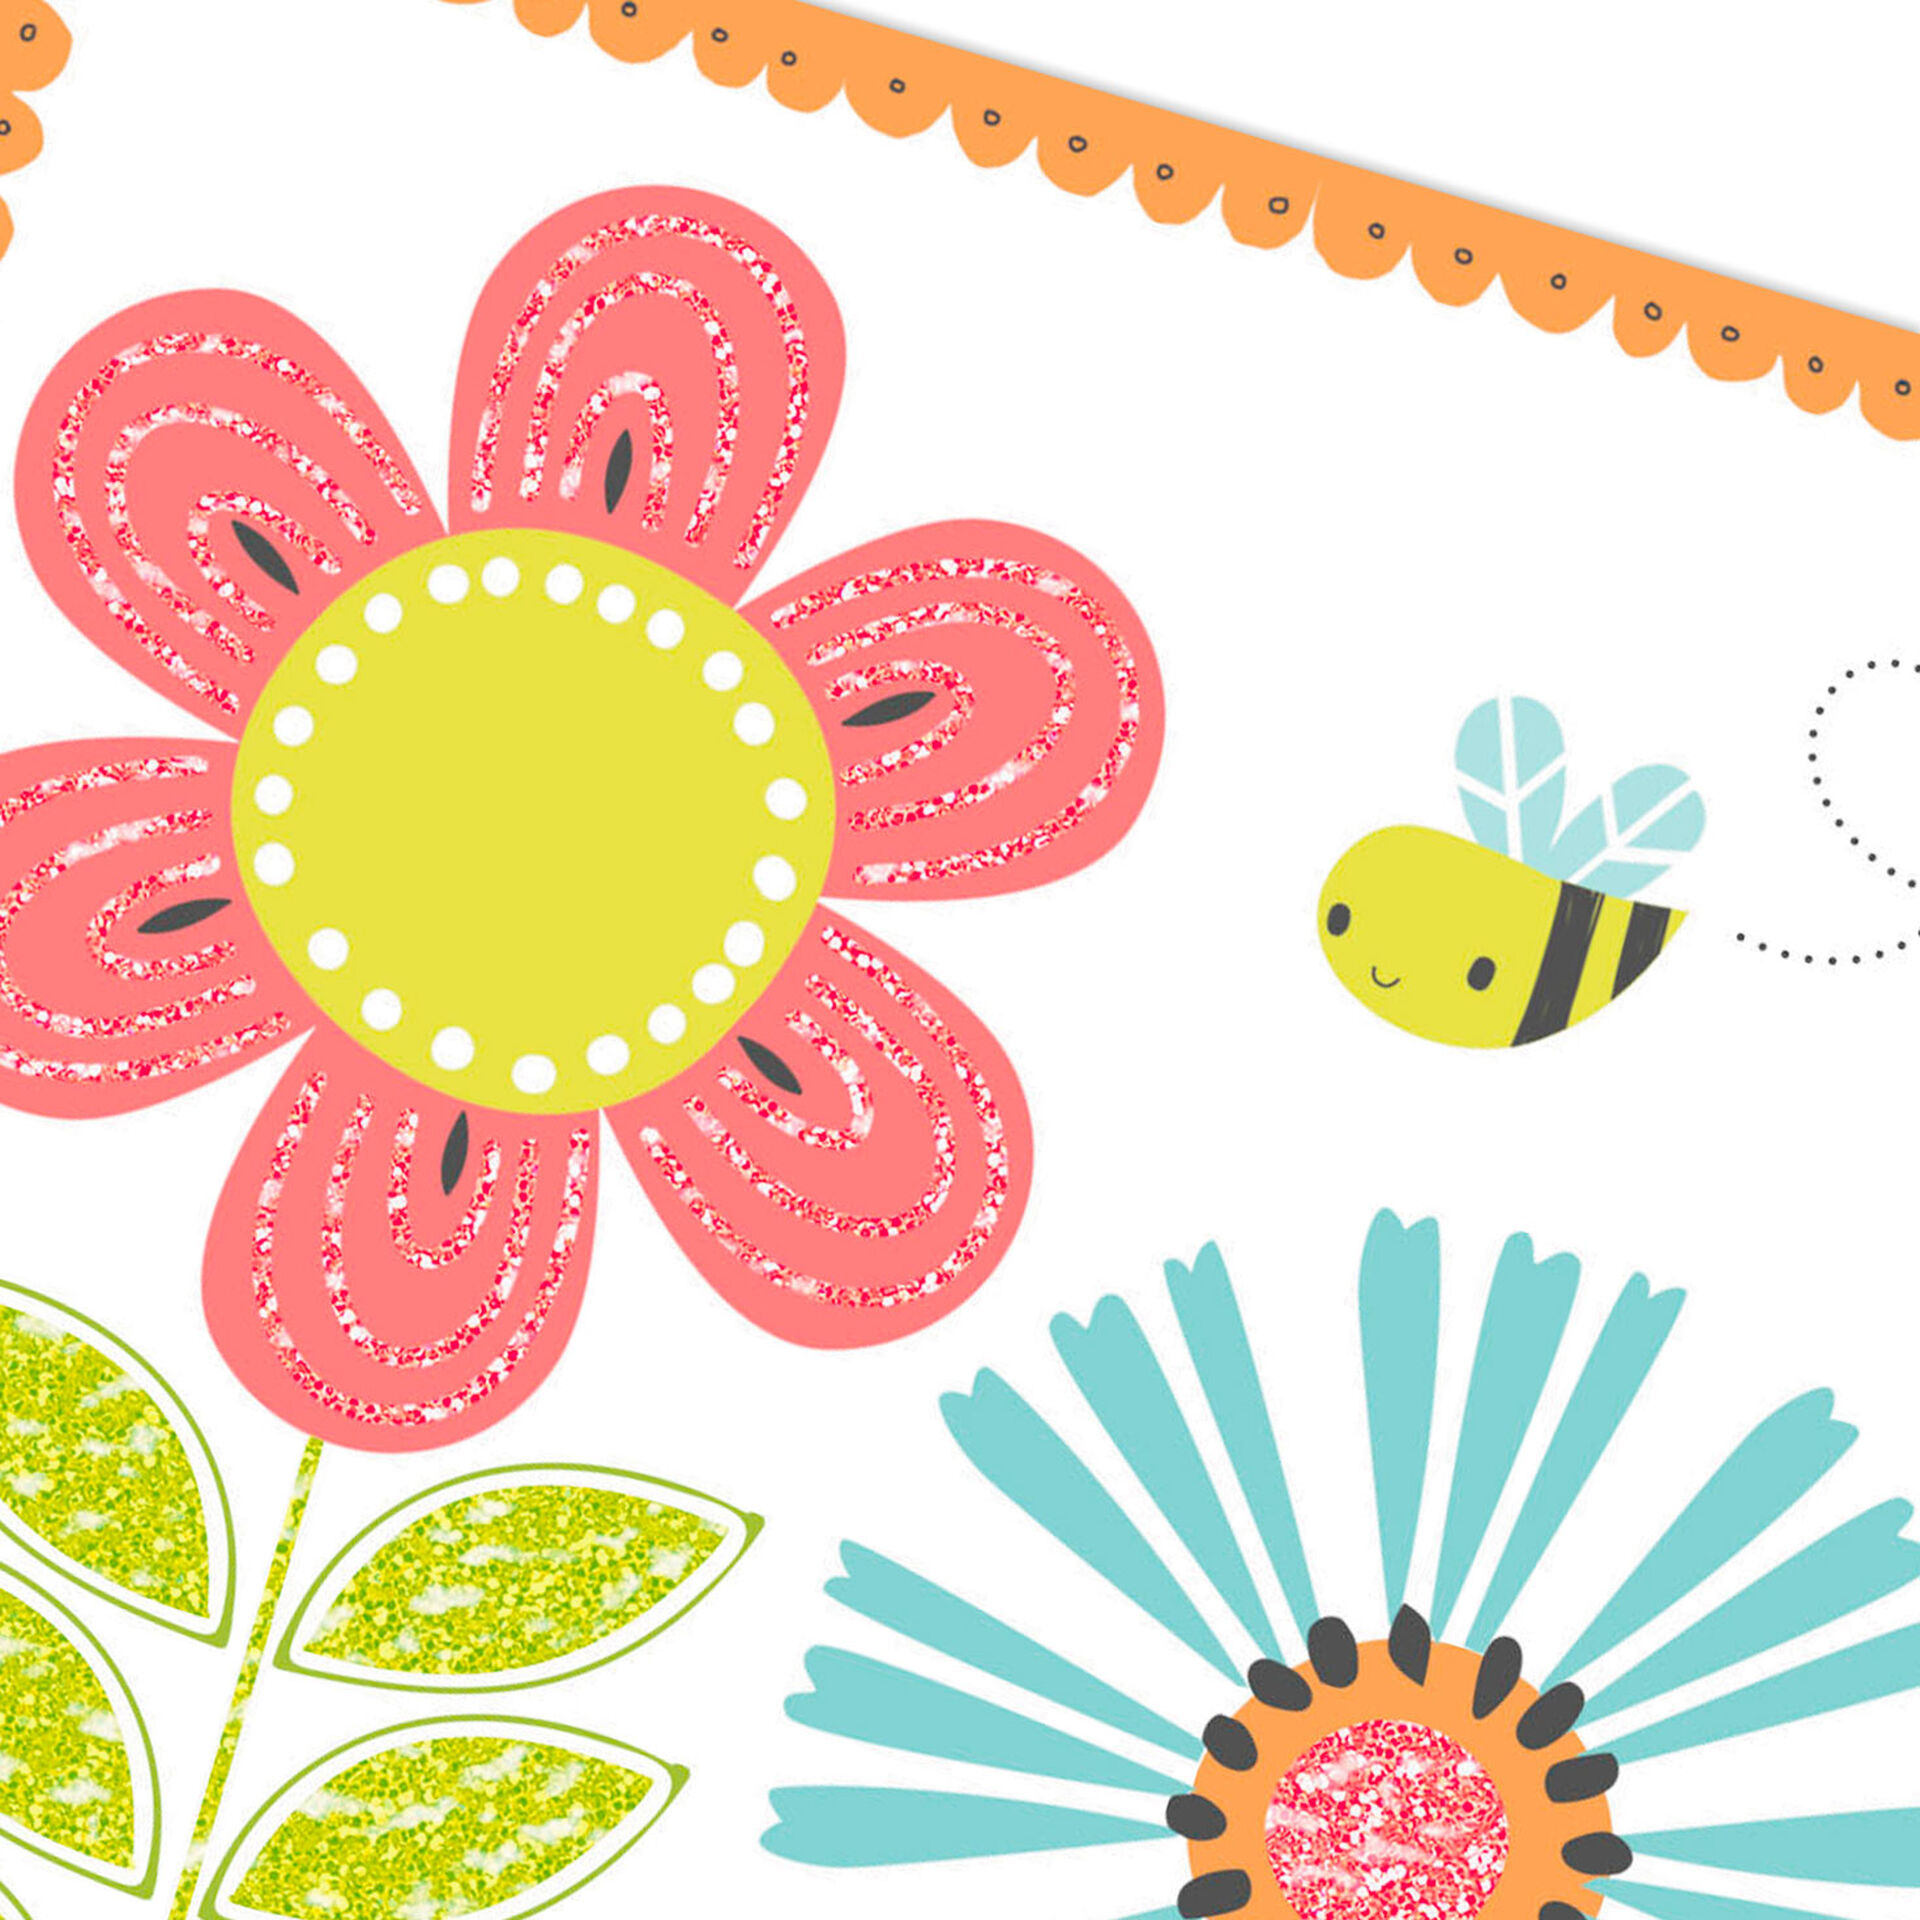 Flowers-and-Bees-Blank-Card_299IMP1744_03